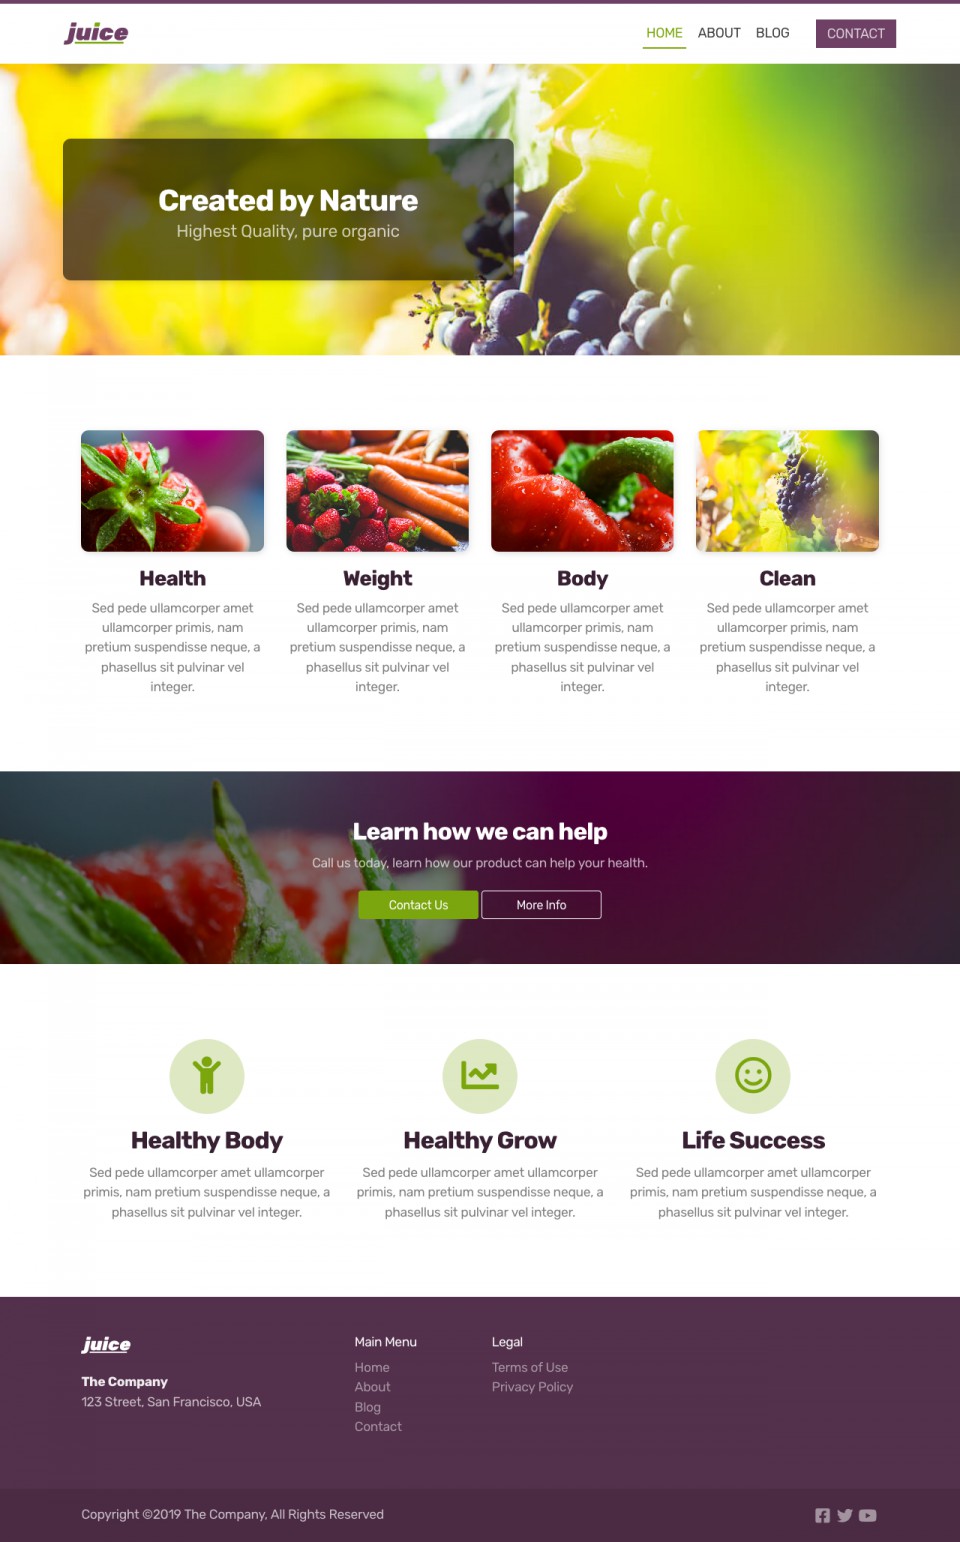 Juice Website Template - Ideal for small businesses, startups, bloggers, and anyone looking to create a vibrant and visually appealing website focused on fresh juice, nature, or healthy food.